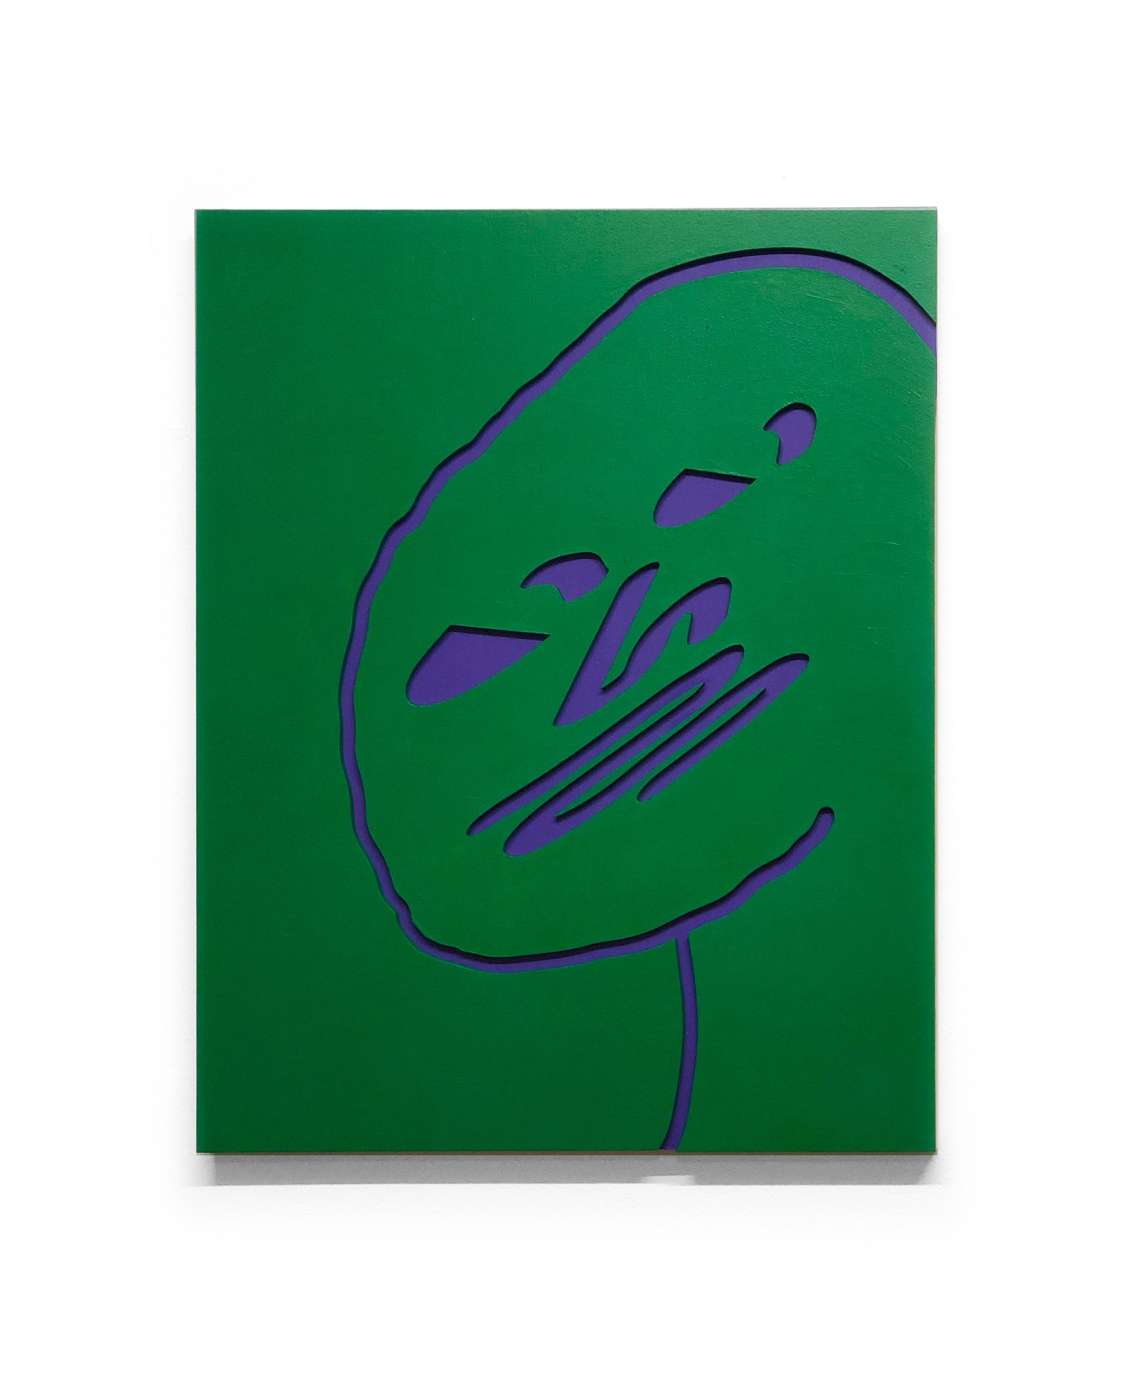 An a green artwork with a blue face showing through by Jersin Crosby